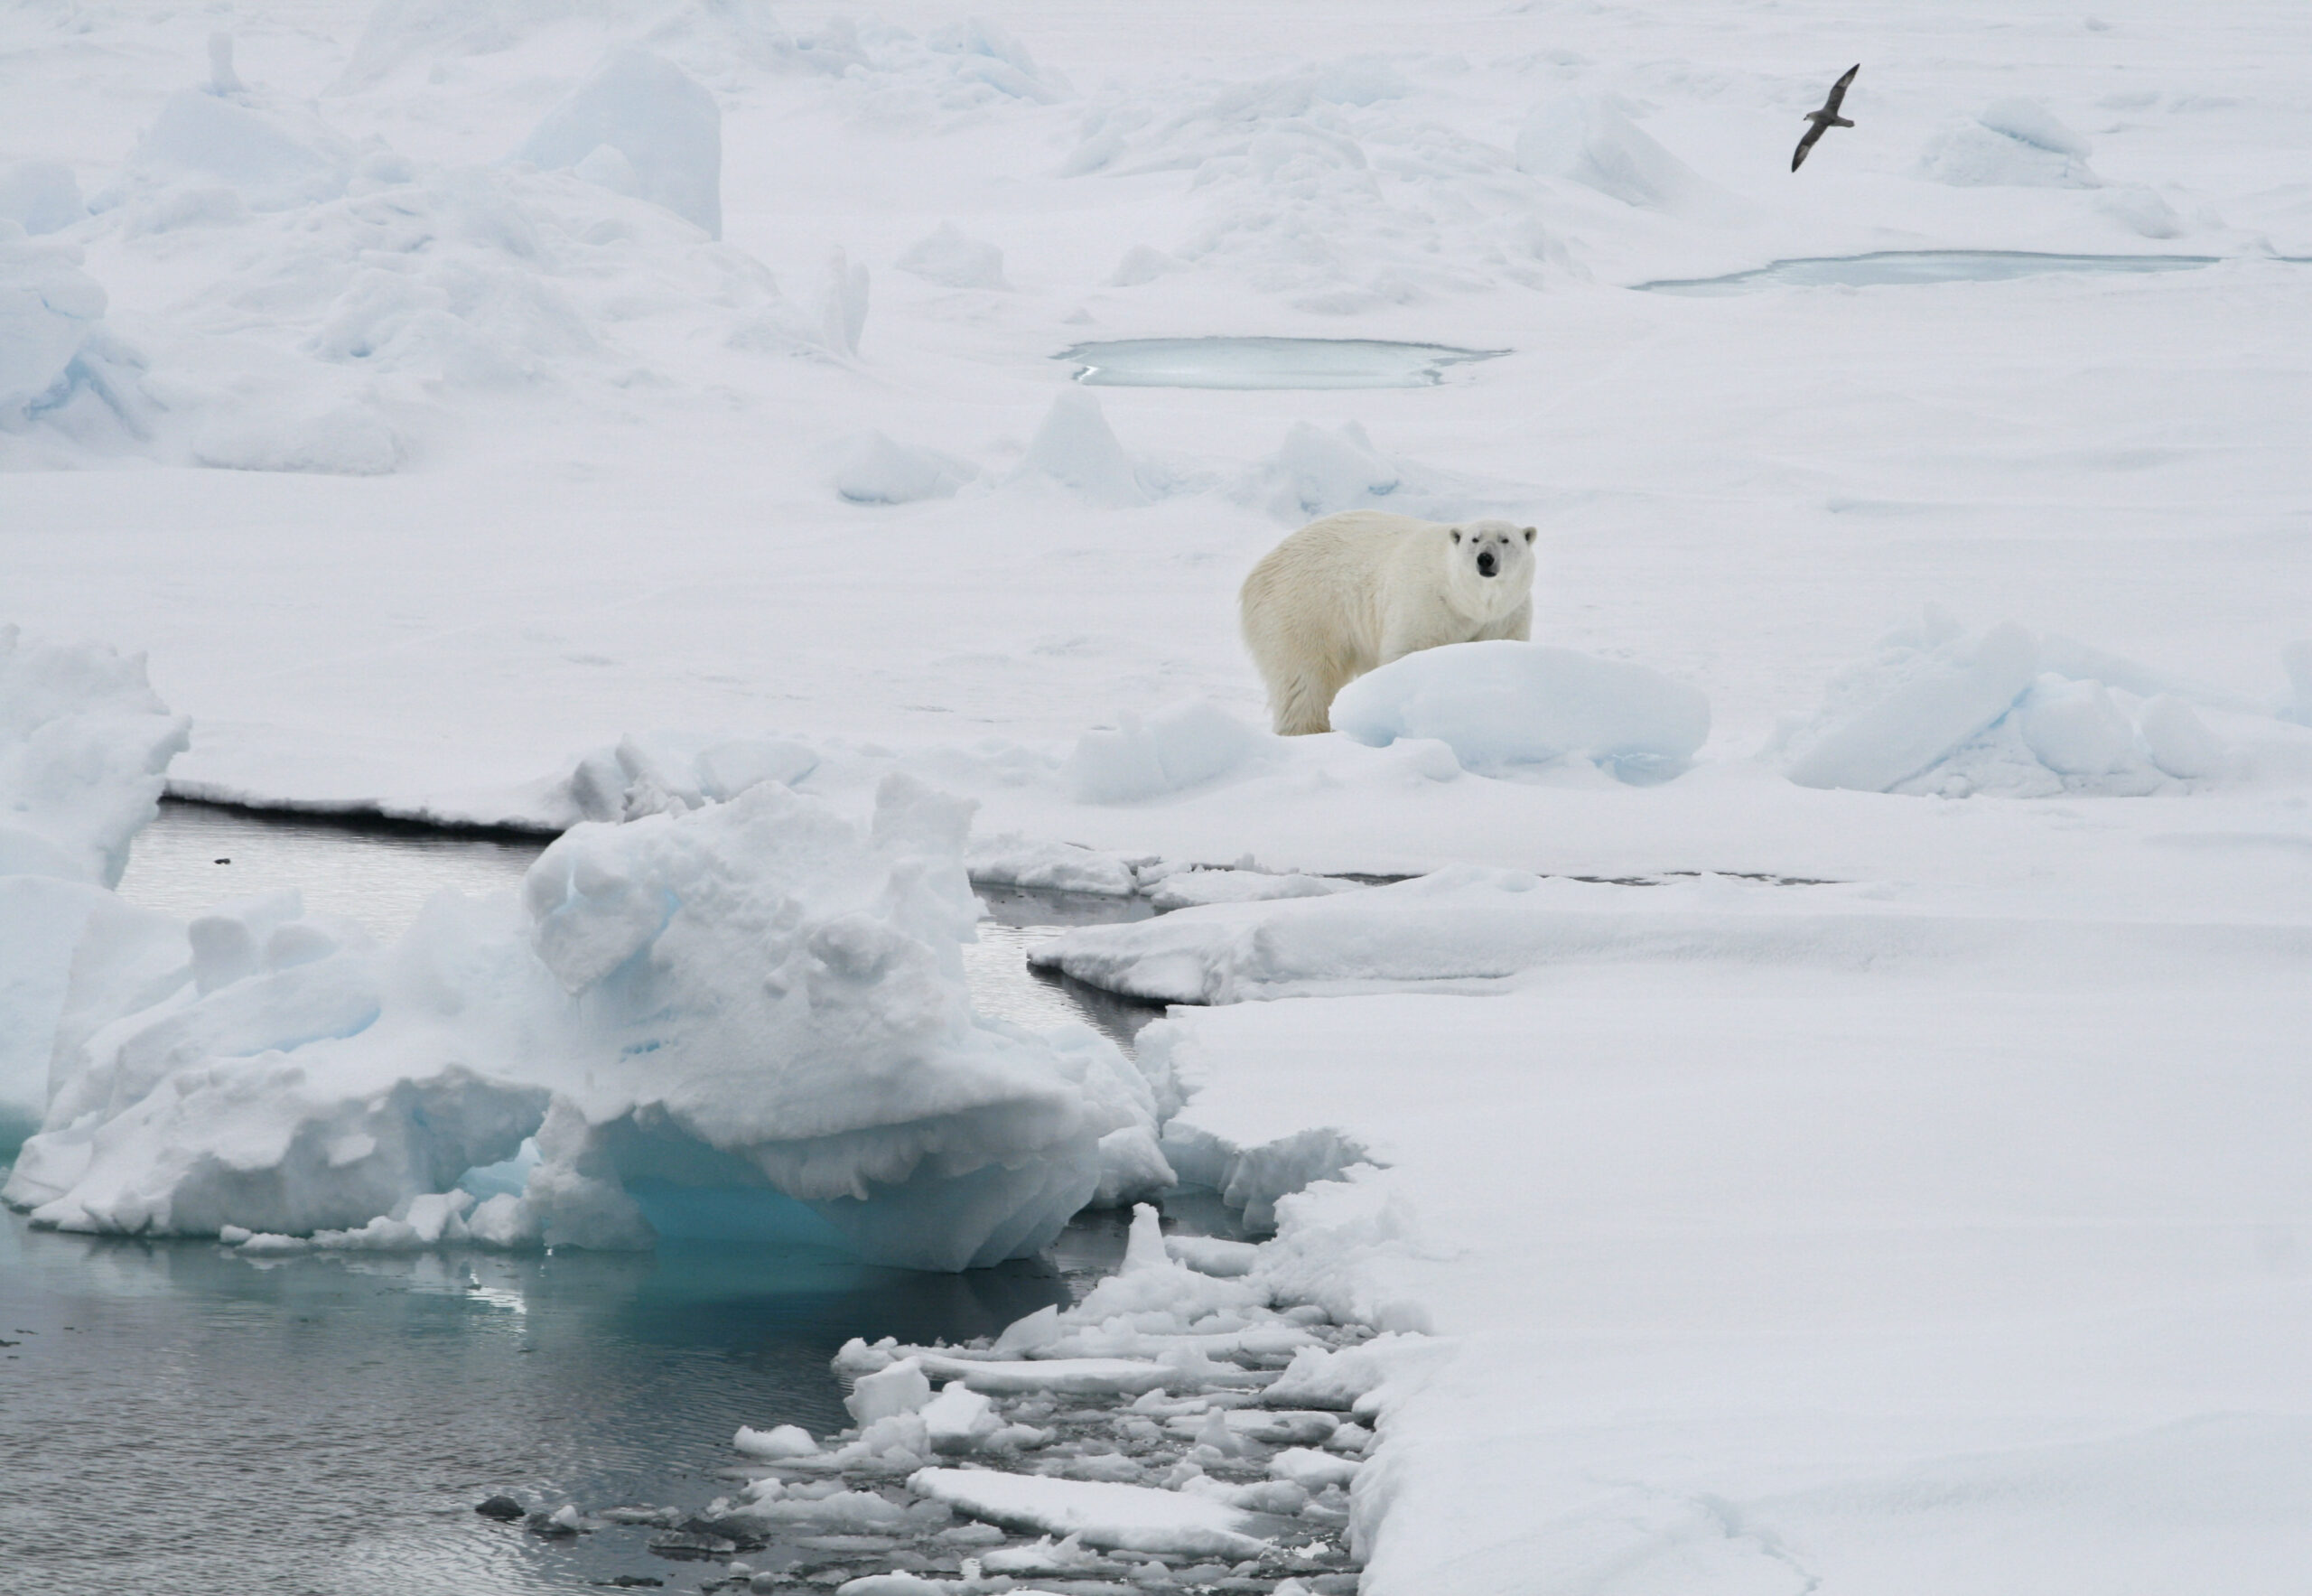 FILE - A polar bear stands on an ice floe near the Norwegian archipelago of Svalbard, Friday June 13, 2008. A polar bear attacked a campsite Monday, Aug. 8, 2022 in Norway’s remote Arctic Svalbard Islands, injuring a French tourist, authorities said, adding that the wounds weren't life-threatening. The bear was later killed. (AP Photo/Romas Dabrukas, File)